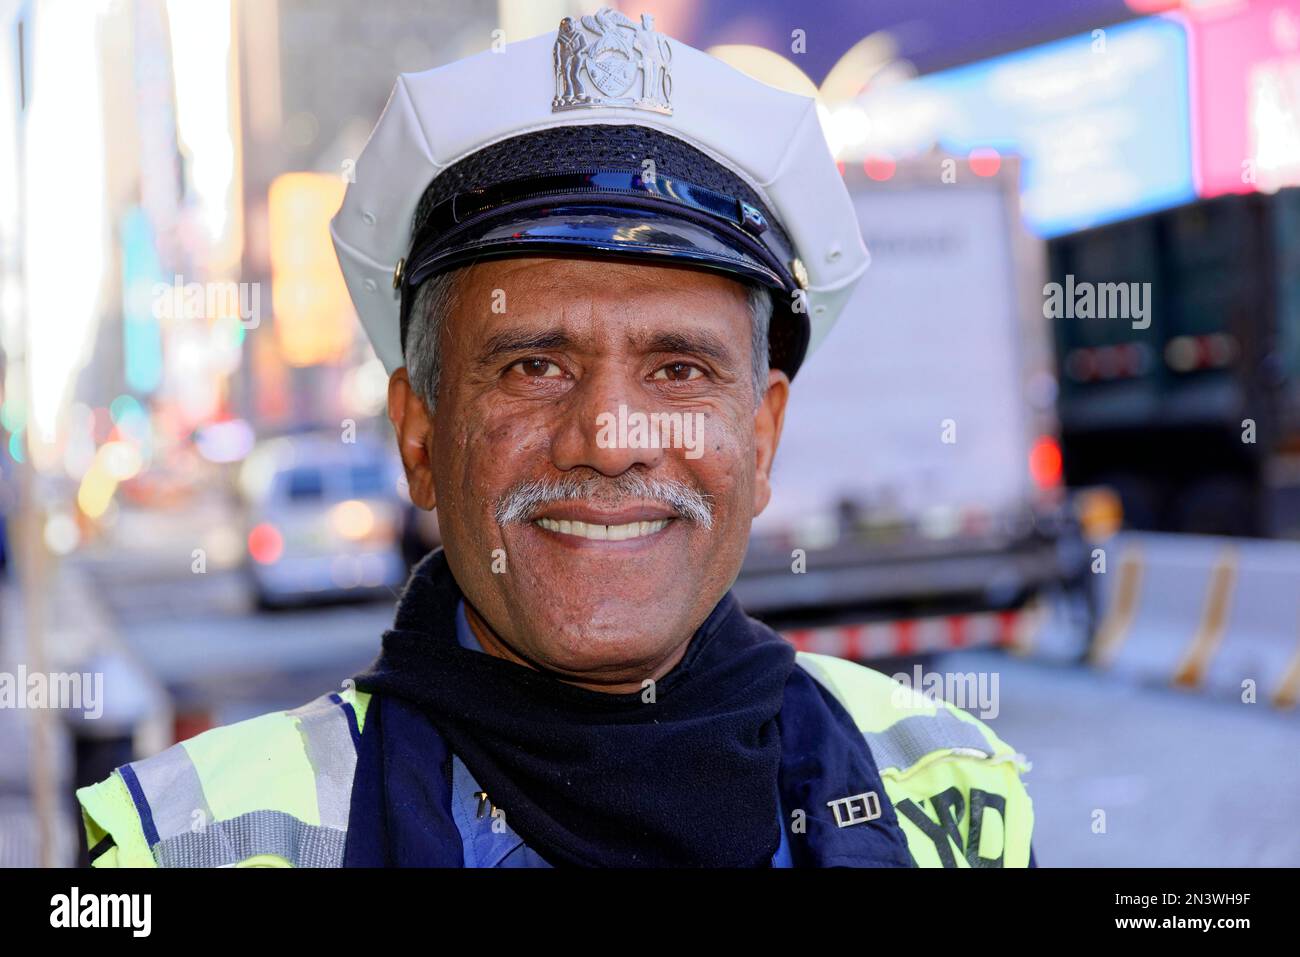 New York City Police Department Traffic Cop, NYPD, Manhattan, New York City (Photo taken with permission) Stock Photo